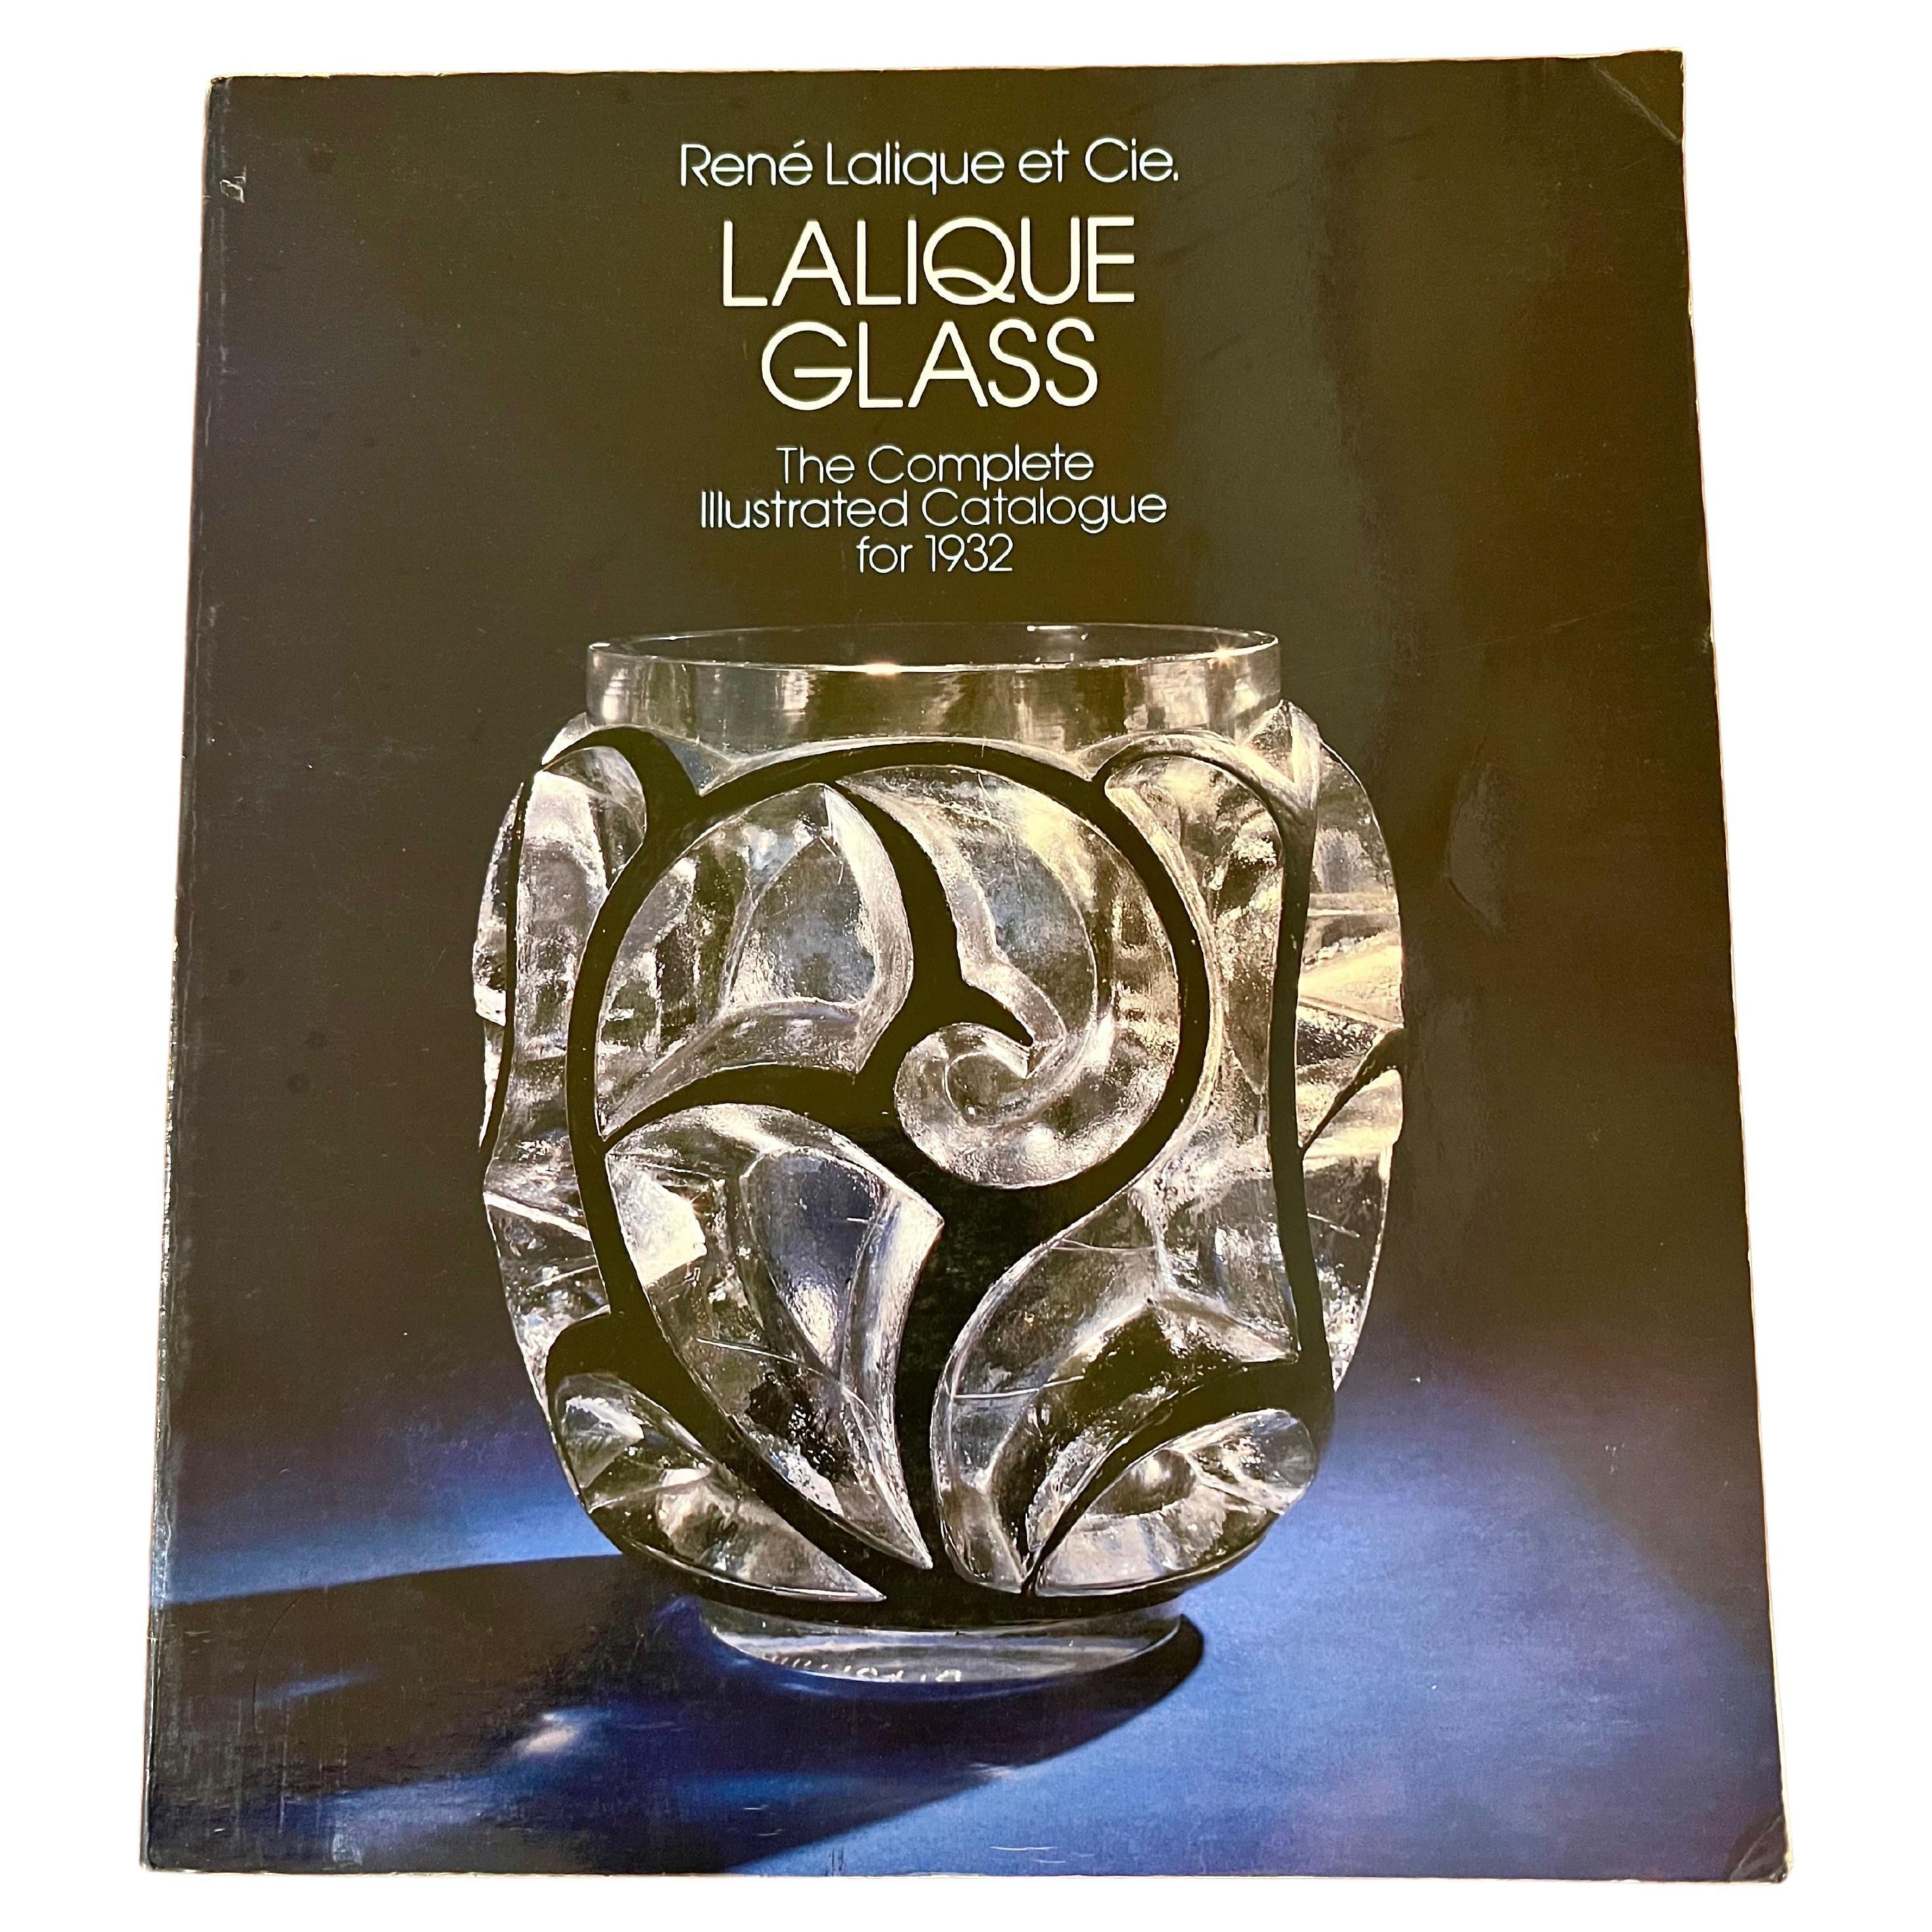 1981 Lalique Glass Ilustrated Catalog Book by Dover Publications For Sale